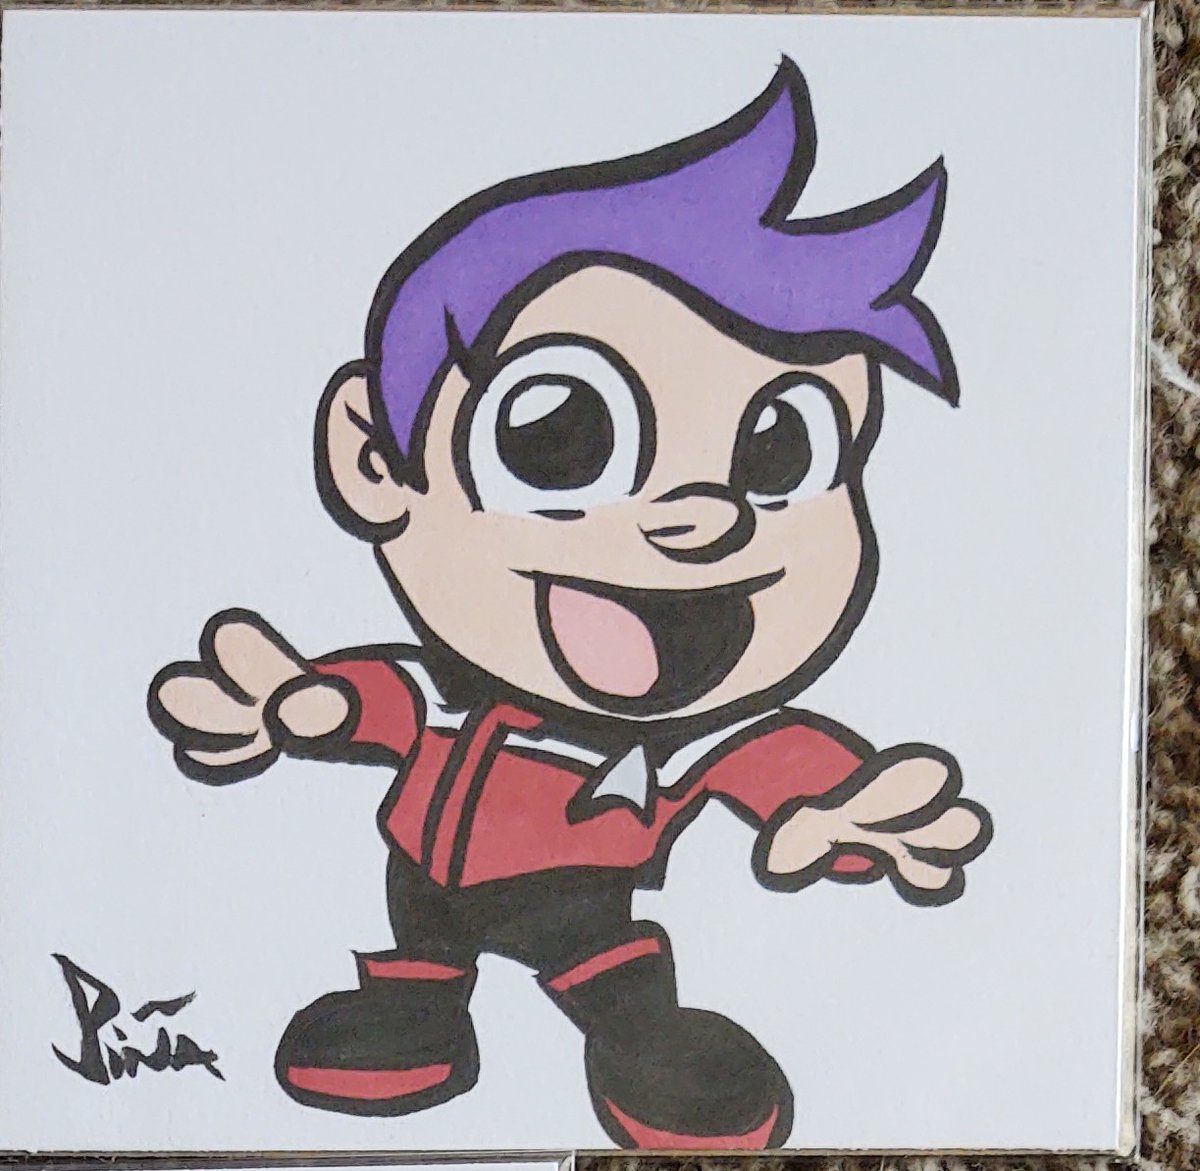 'We are SO getting fired for this.' Another quick color sketch of the crew of The Cerritos, aspiring Ensign Boimler! He's just excited about his new transfer. 

#startrek #lowerdecks #chibi #ink #marker #sketch #cbs #boimmeup #morelikehimthanidliketoadmitpubliclybuthereweare